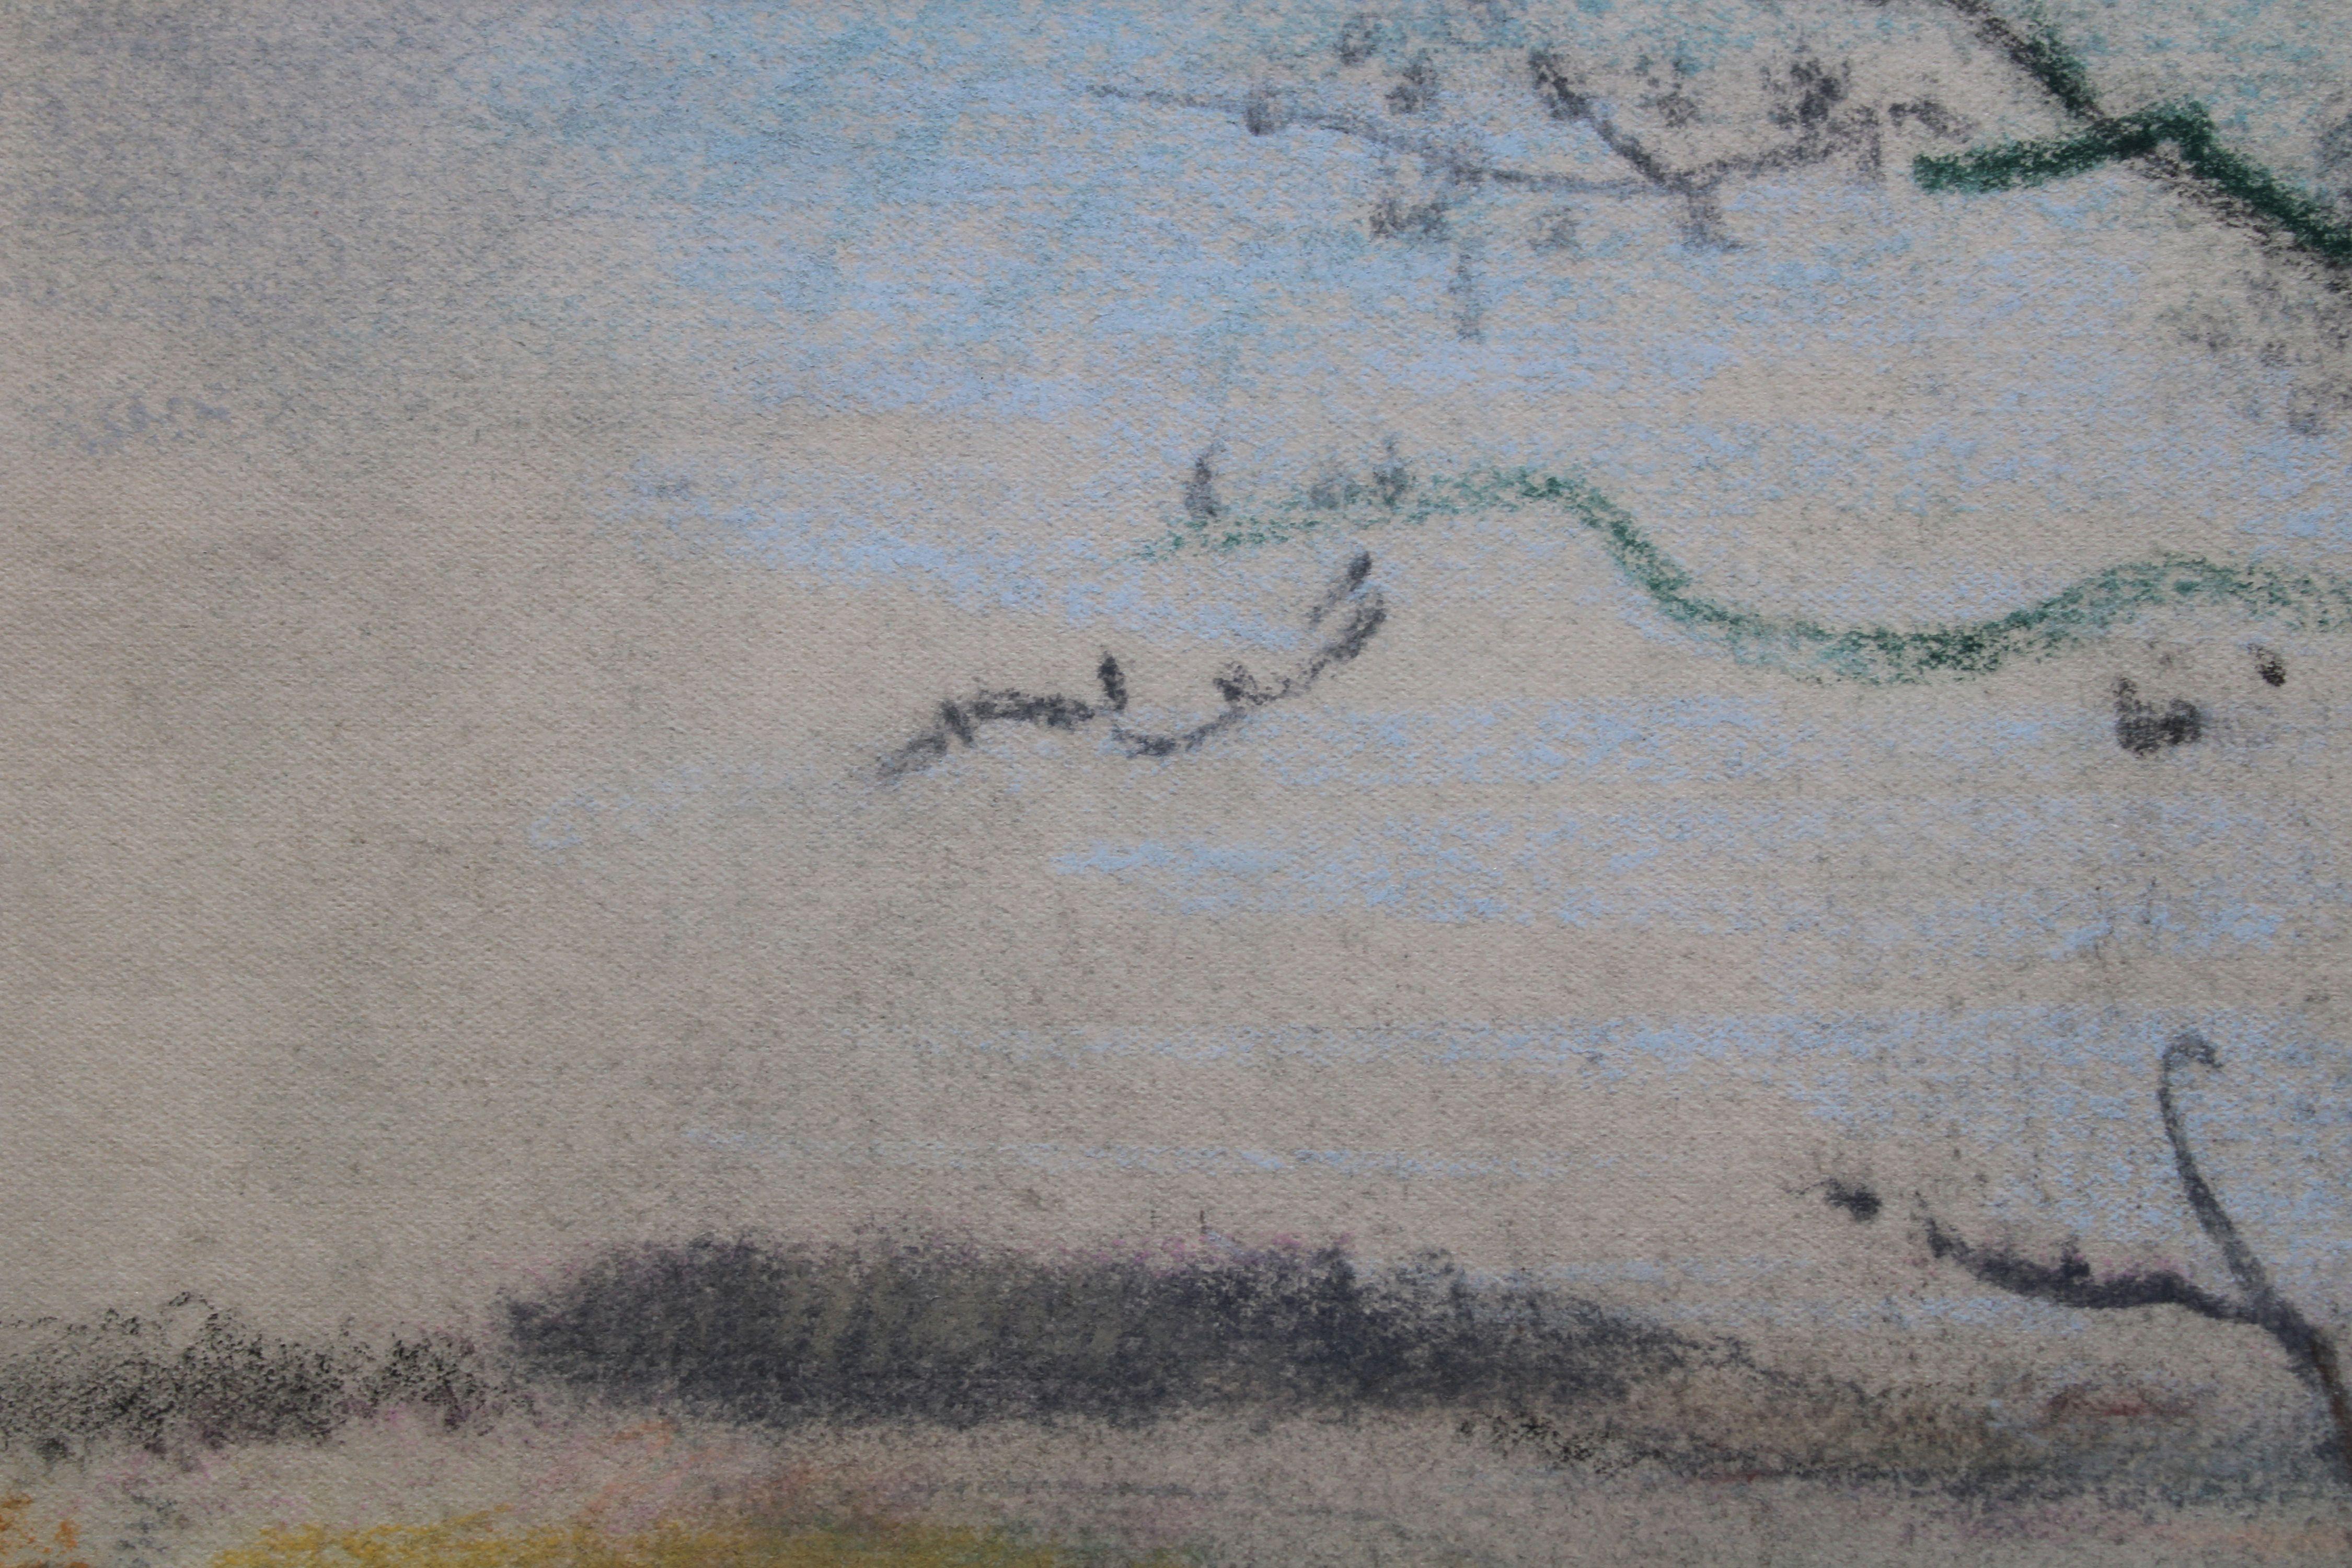 Flooded river

1950s. Paper, pastel. 26,5x35,5 cm

The medium used for this artwork is pastel on paper, offering a soft and powdery texture that can effectively convey the atmospheric and natural elements of the subject. The flooding of a river can